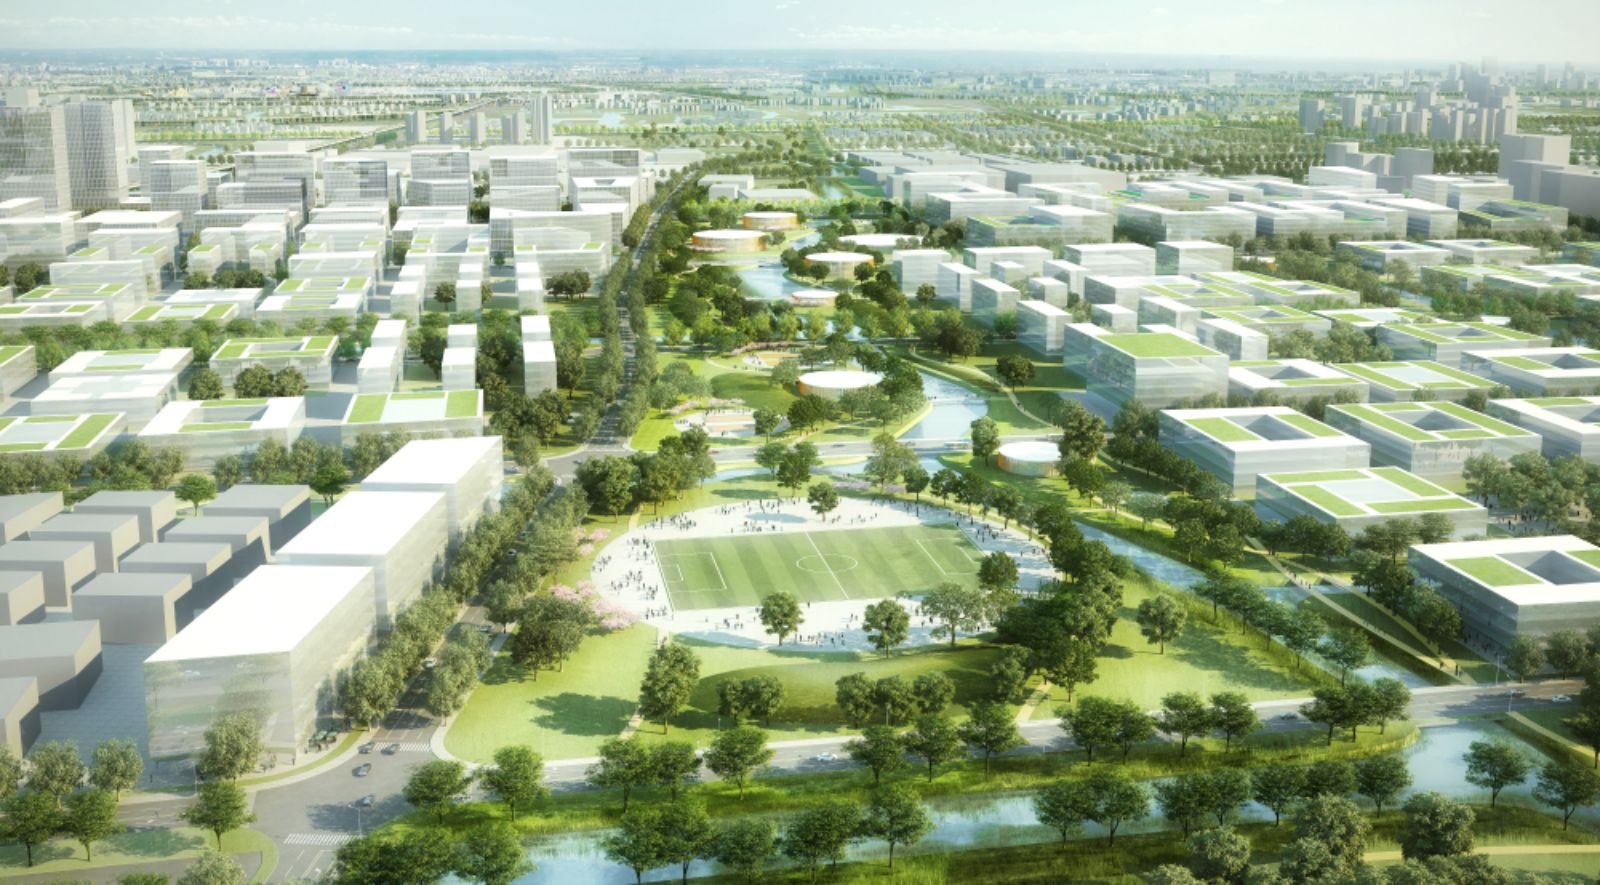 Zhangjiang Science and Technology City